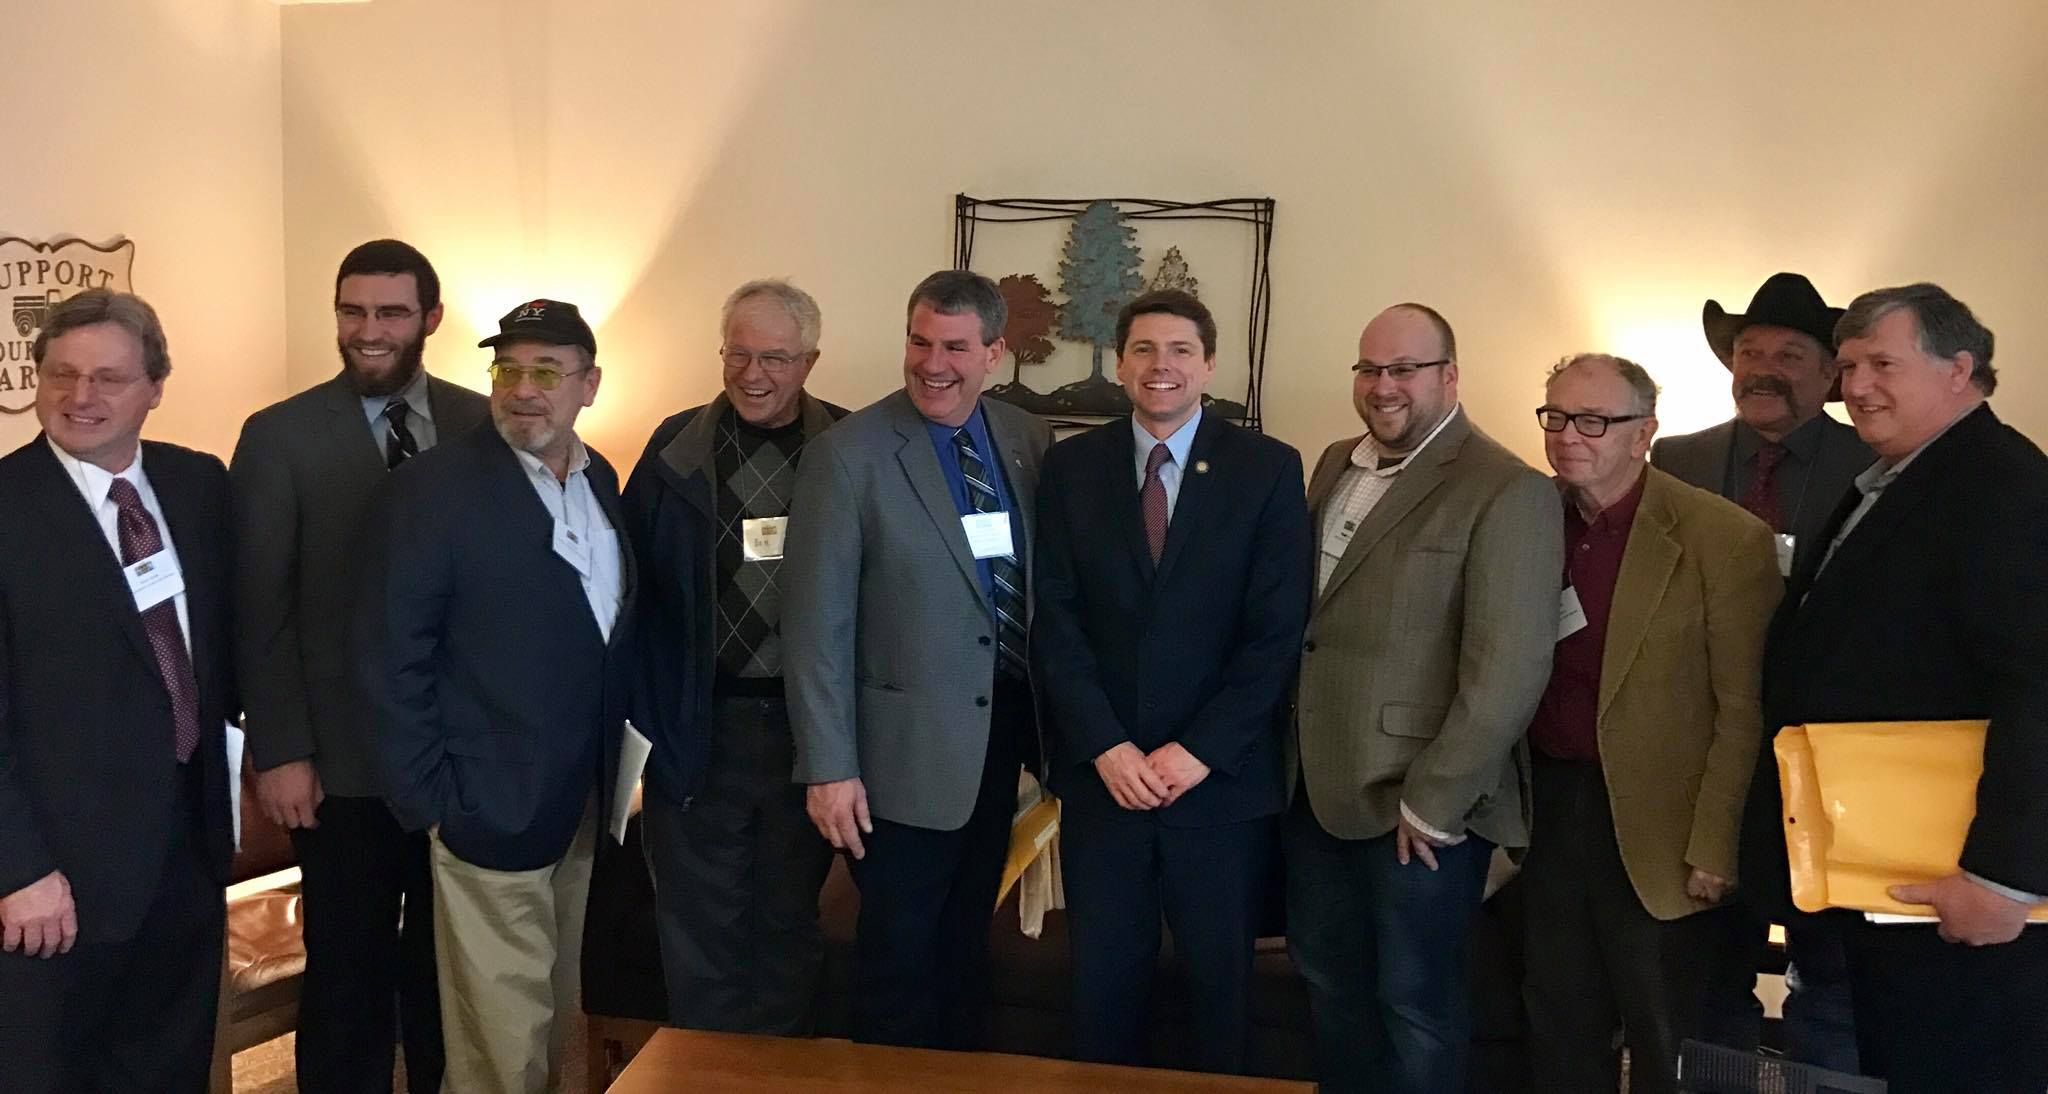 In March 2017, Assemblyman Jones met with local Farm Bureau members to learn about agricultural issues in the North Country. The state budget restores many important programs that provide vital suppor